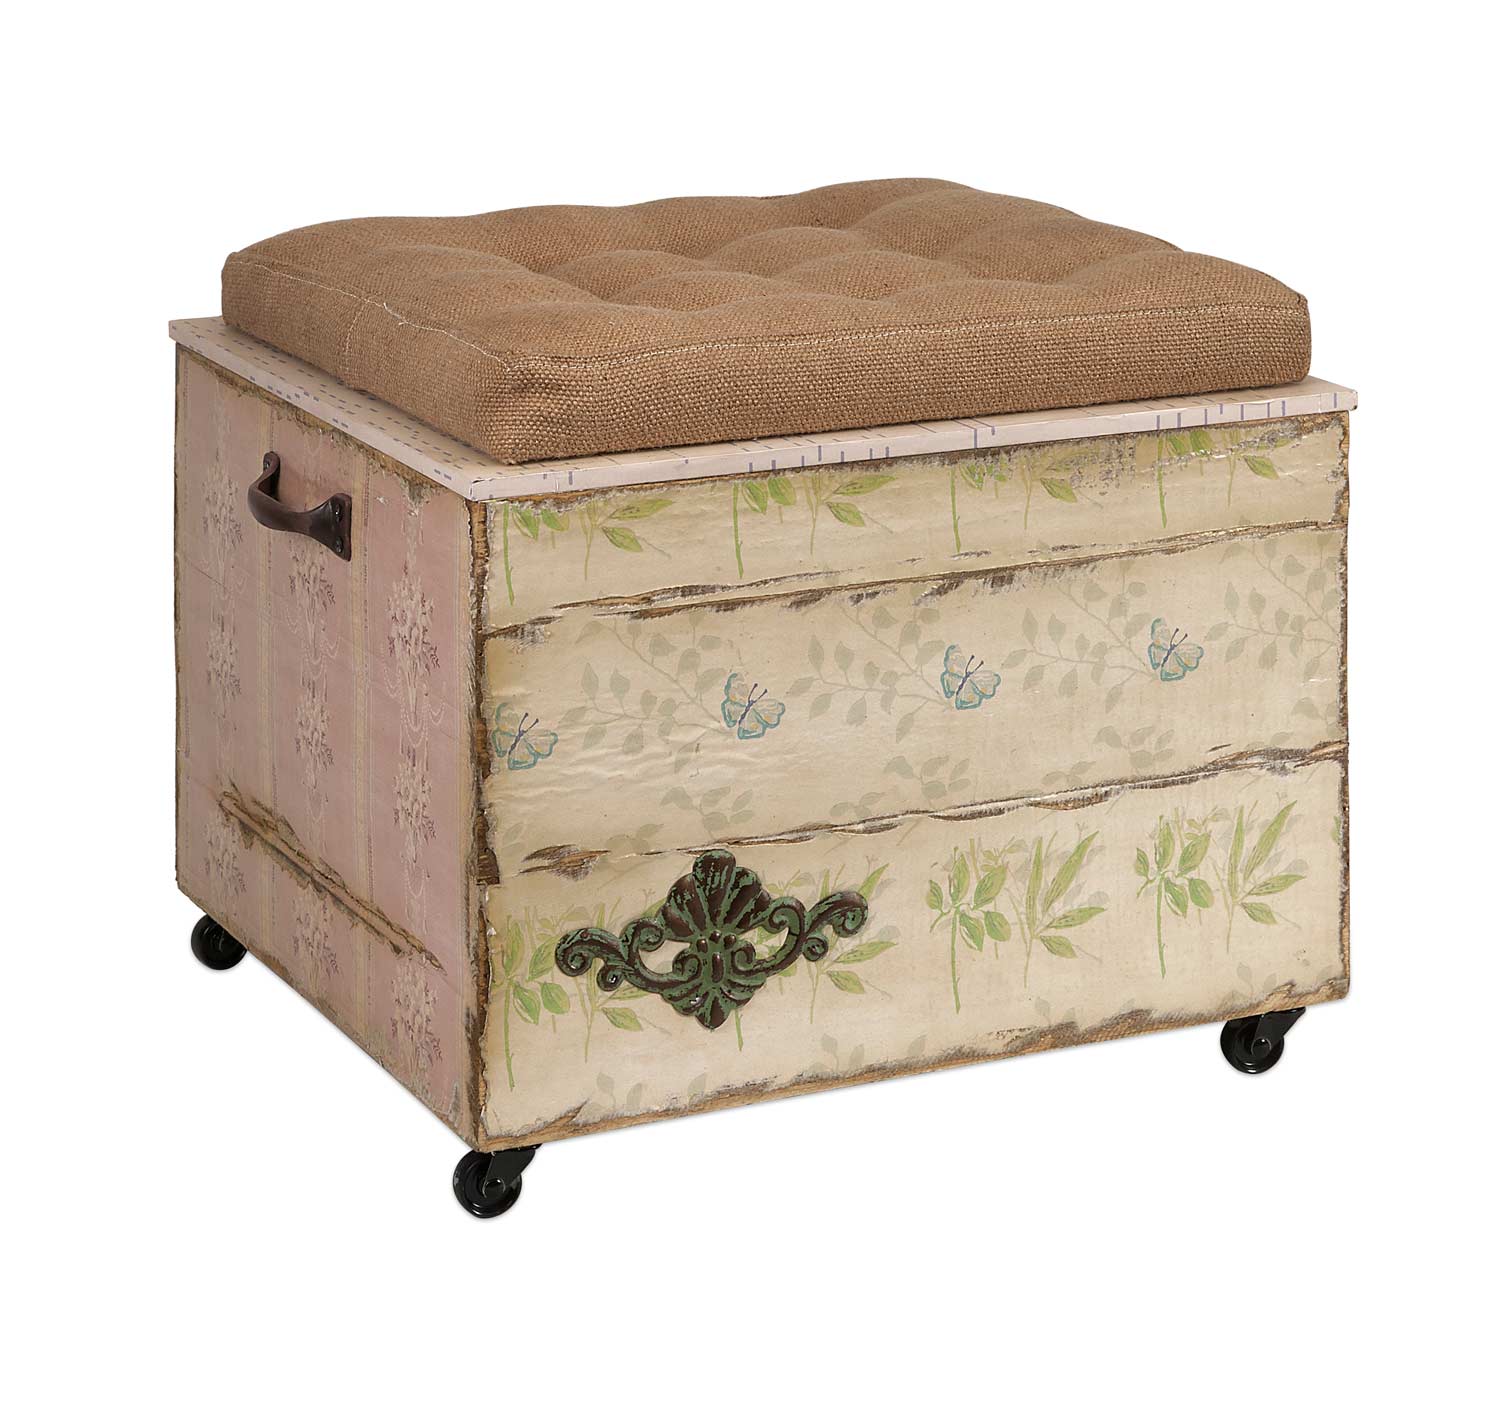 IMAX Evelyn Crate Storage Ottoman